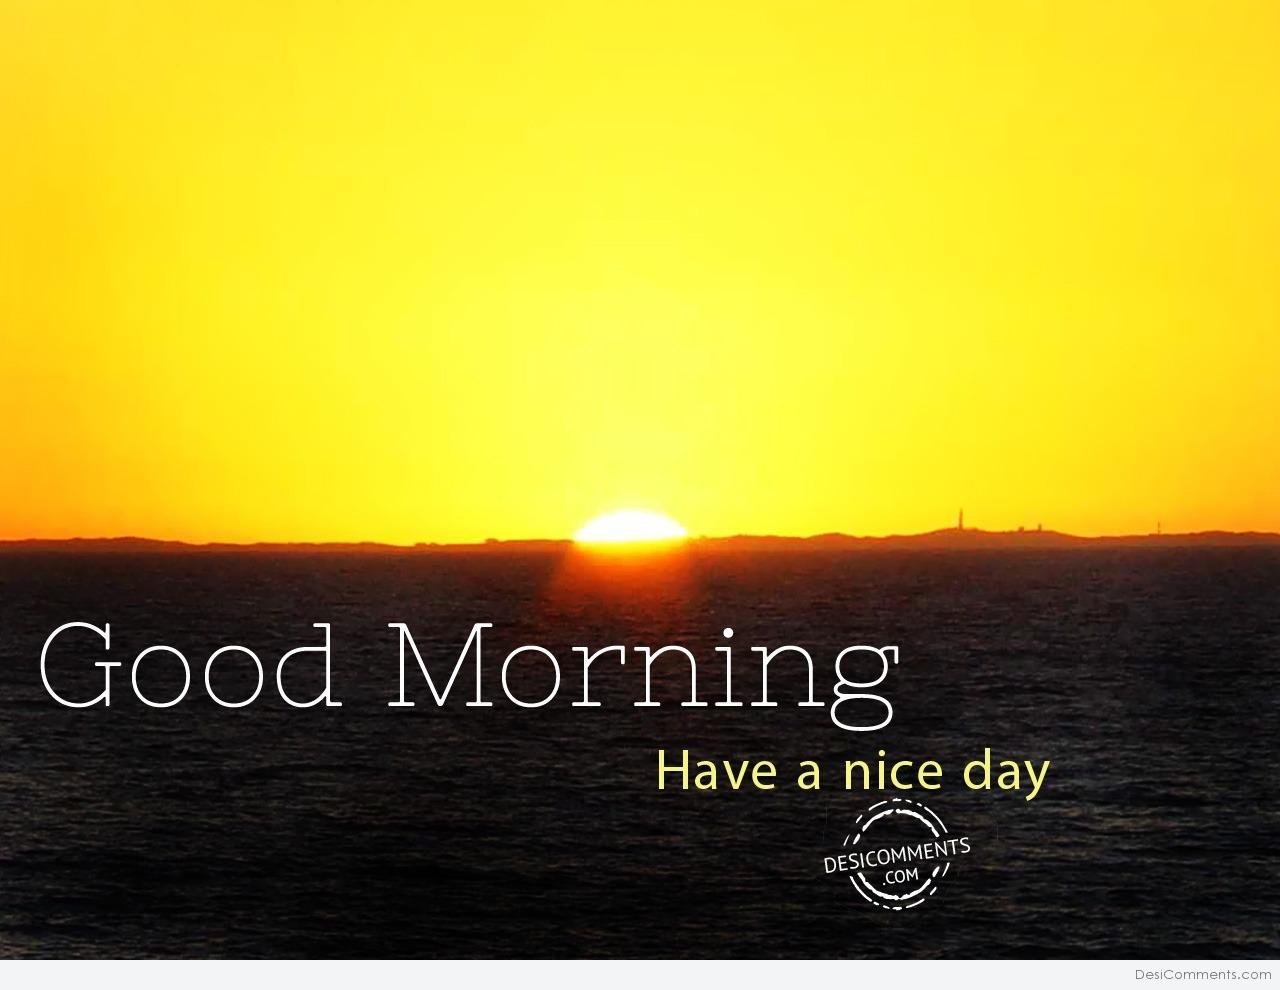 Good Morning Have A Nice Day – Picture - DesiComments.com